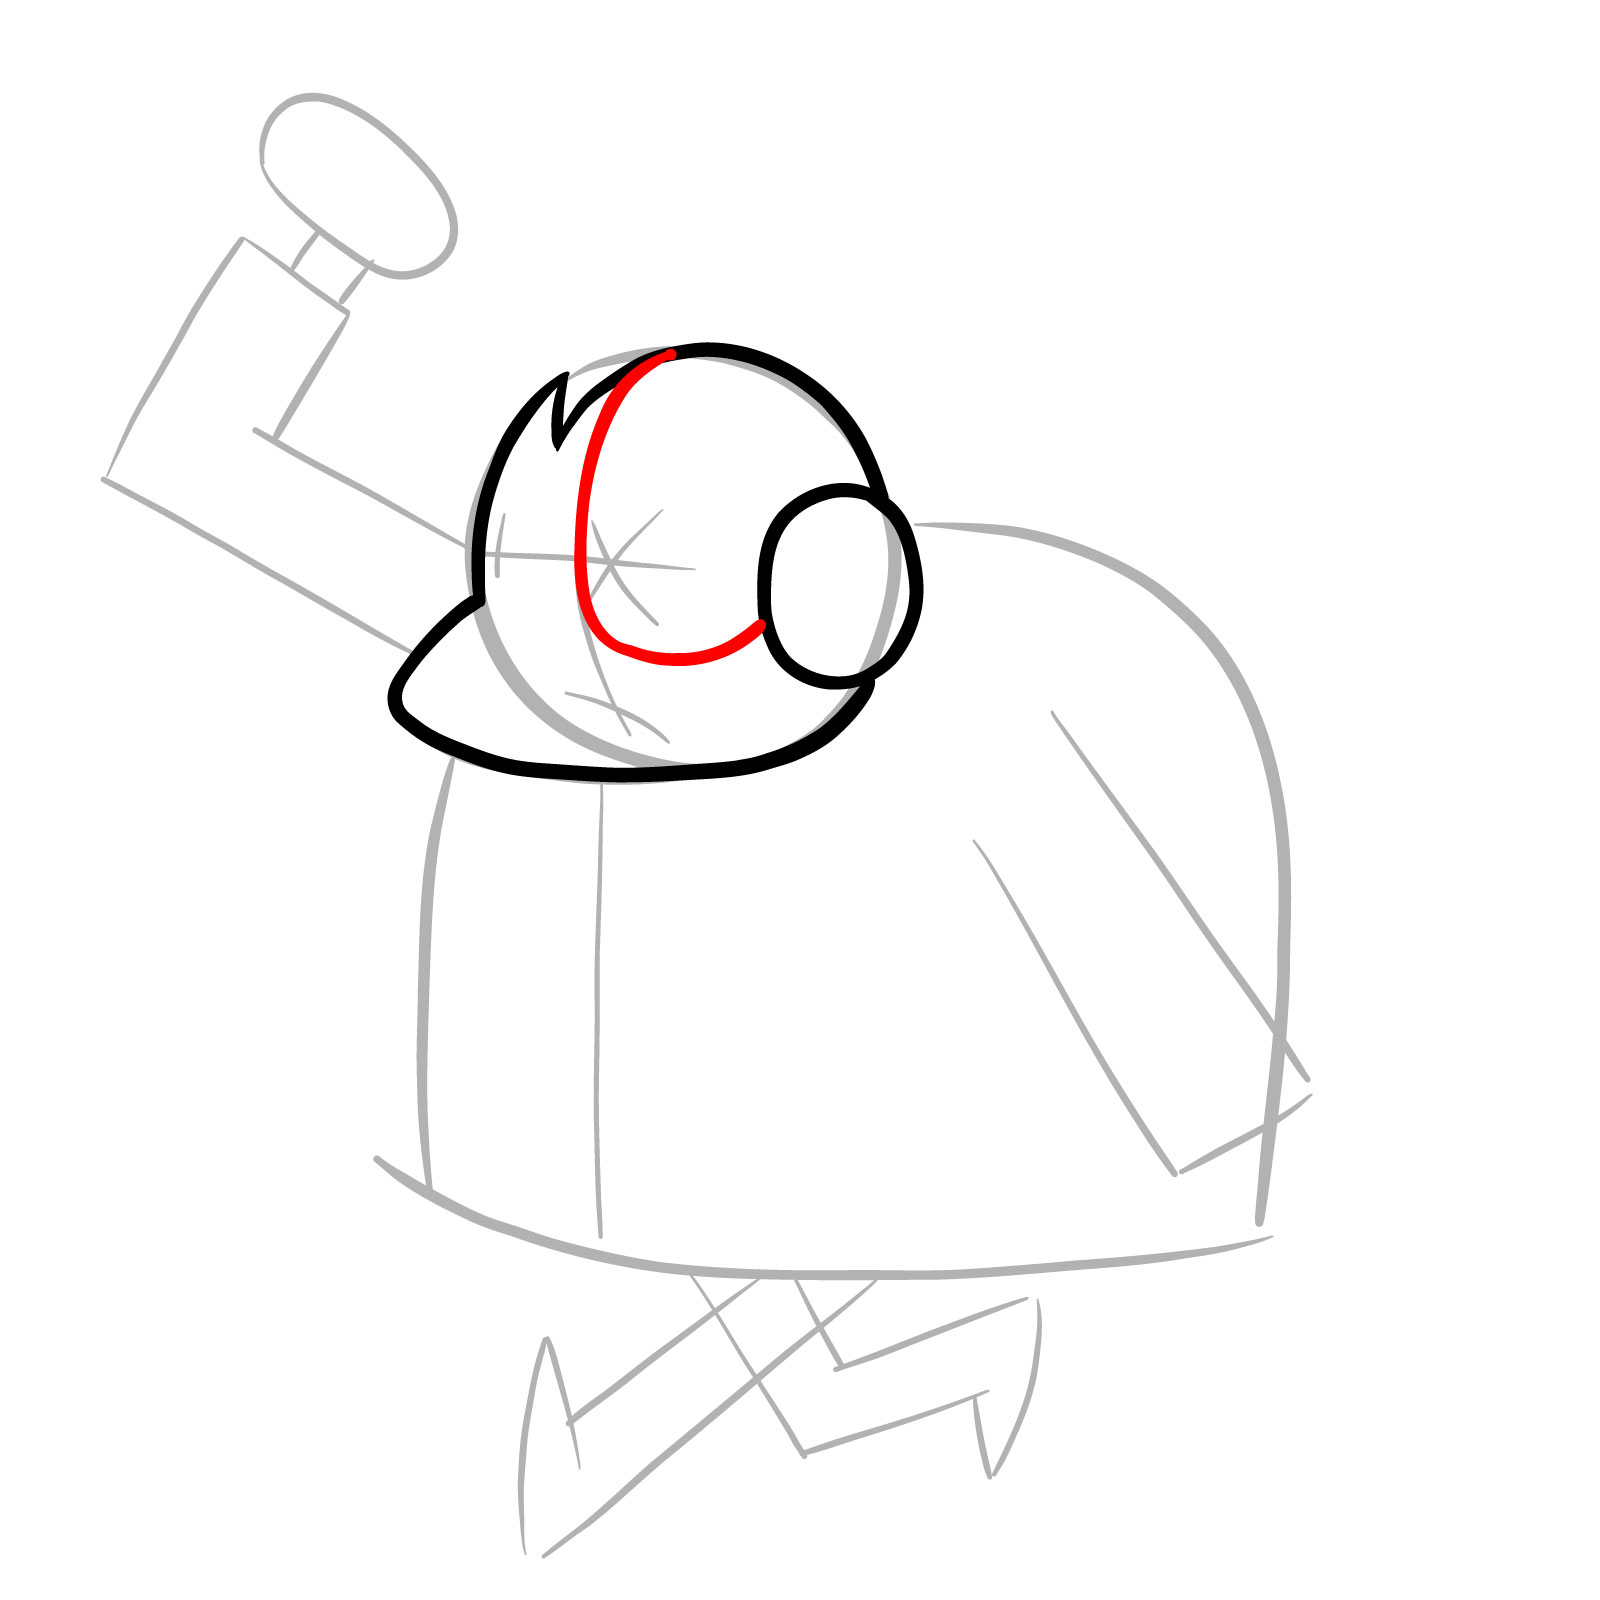 How to draw Lord Boxman from OK K.O.! - step 06